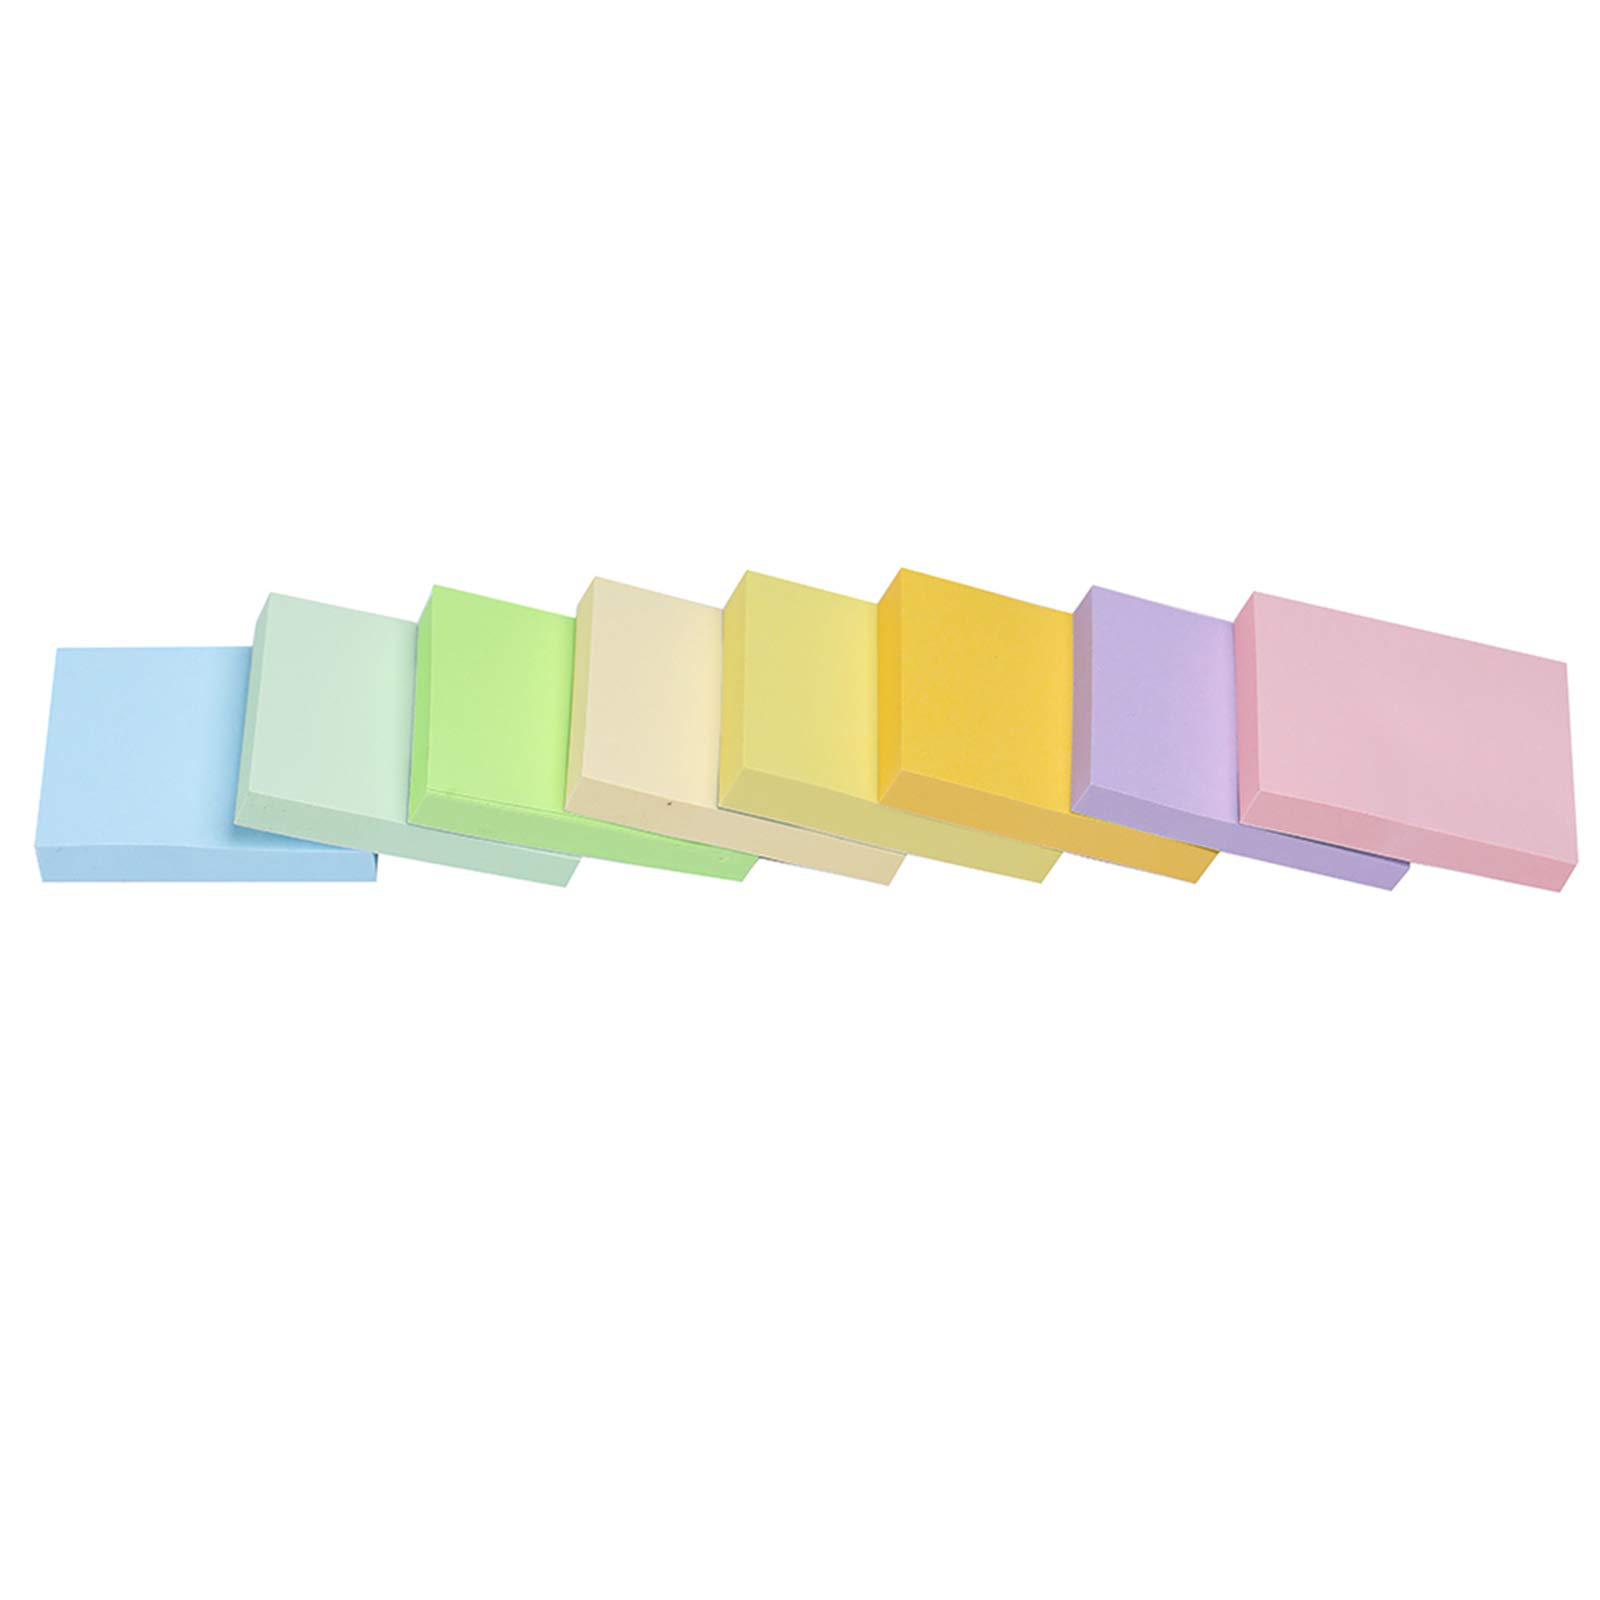 Vanpad sticky notes 1.5x2 inches, light colors self-stick pads, 24 pack, 75 sheets/pad